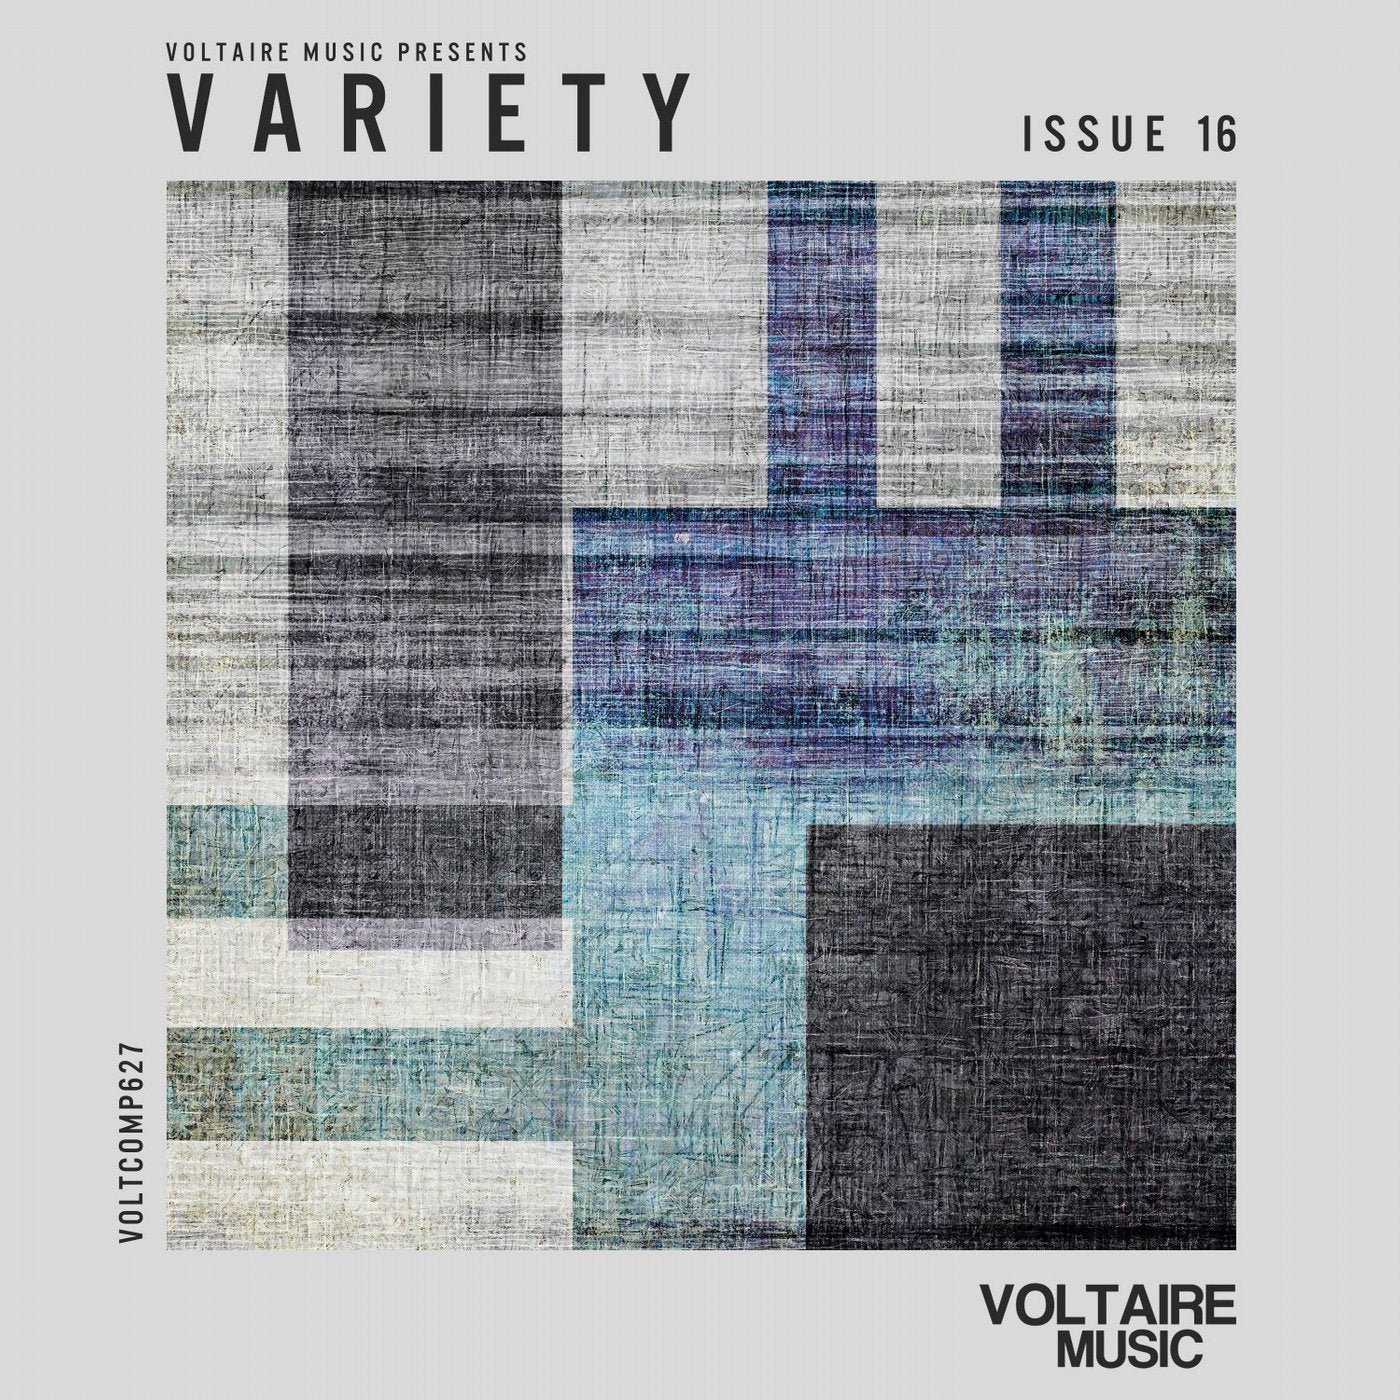 Voltaire Music pres. Variety Issue 16